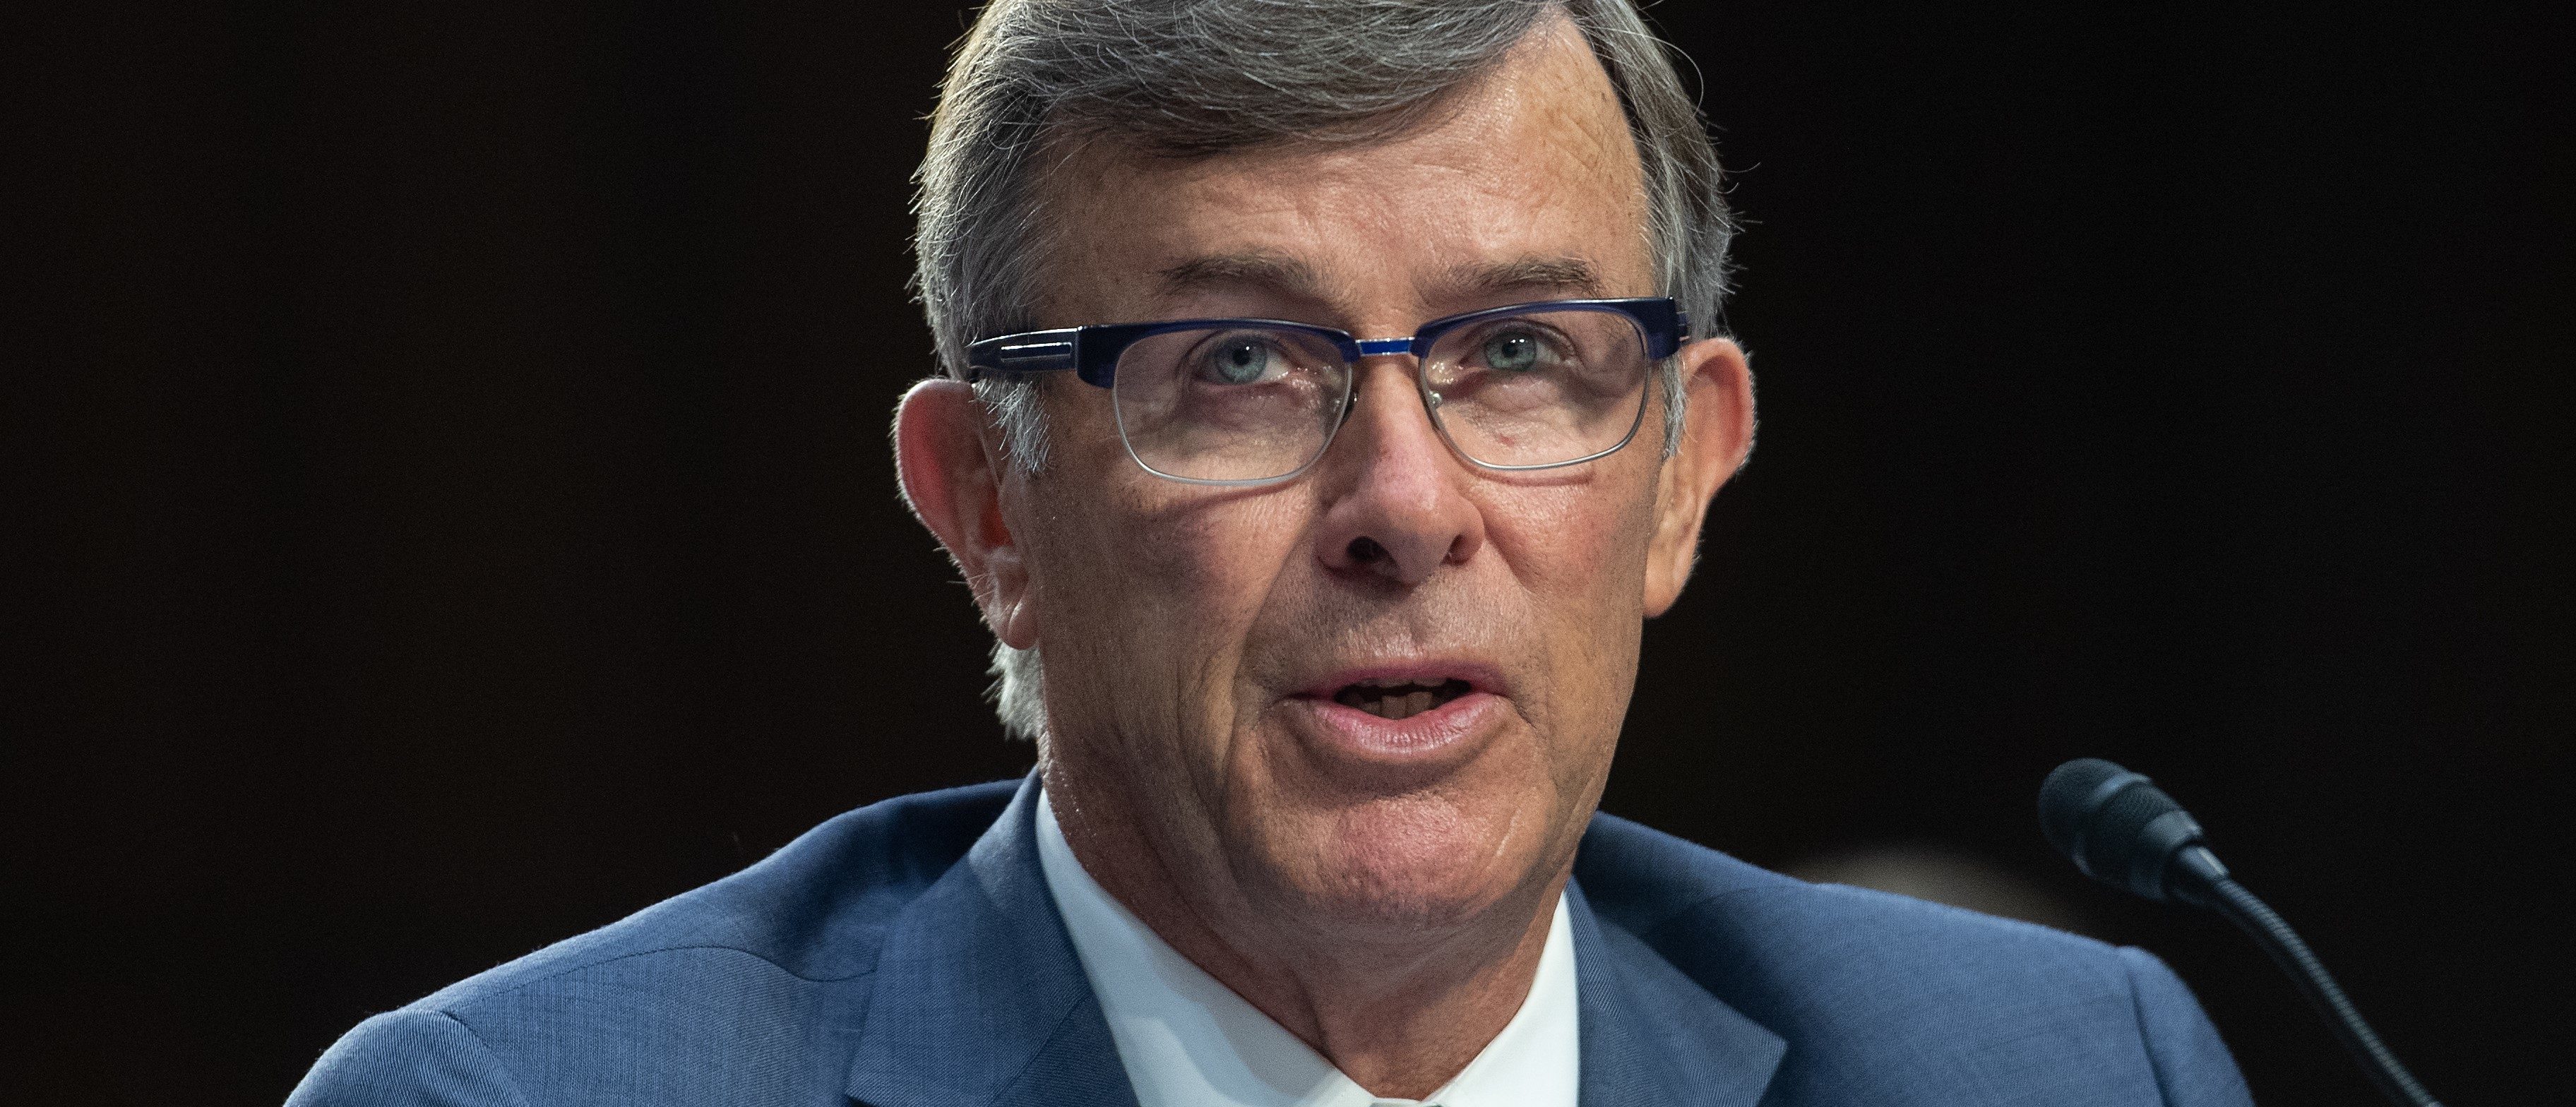 Nominee for director of the National Counterterrorism Center, Joseph Maguire, speaks during his confirmation hearing before the Senate Intelligence Committee on Capitol Hill in Washington, DC, on July 25, 2018. (Photo by NICHOLAS KAMM / AFP) (Photo credit should read NICHOLAS KAMM/AFP/Getty Images)